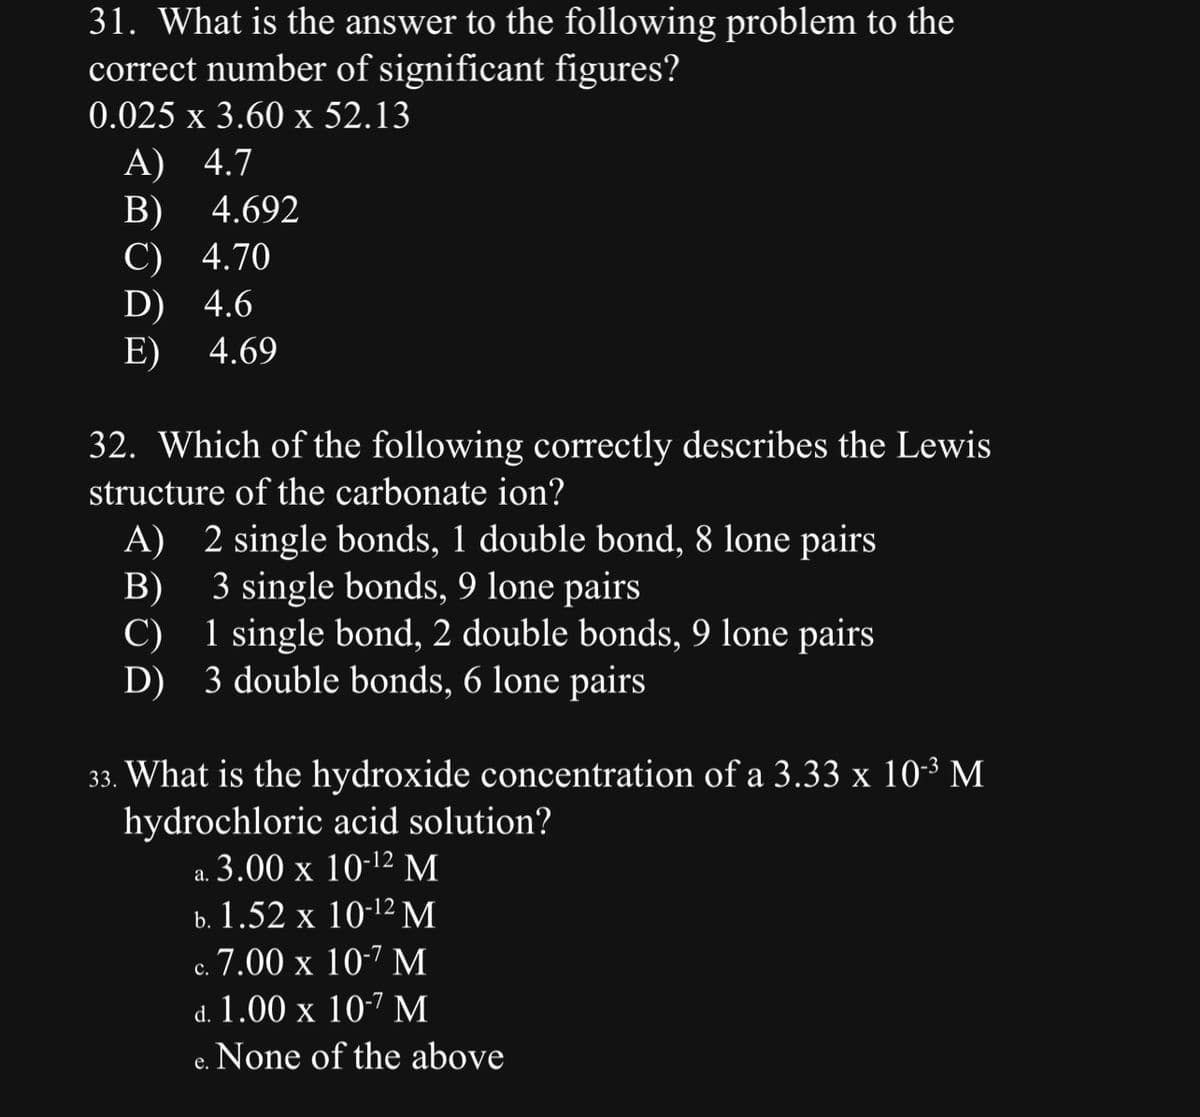 31. What is the answer to the following problem to the
correct number of significant figures?
0.025 x 3.60 x 52.13
A) 4.7
B)
4.692
C) 4.70
D) 4.6
E)
4.69
32. Which of the following correctly describes the Lewis
structure of the carbonate ion?
A) 2 single bonds, 1 double bond, 8 lone pairs
B)
3 single bonds, 9 lone pairs
1 single bond, 2 double bonds, 9 lone pairs
C)
D) 3 double bonds, 6 lone pairs
33. What is the hydroxide concentration of a 3.33 x 10-³ M
hydrochloric acid solution?
a. 3.00 x 10-12 M
b. 1.52 x 10-¹2 M
c. 7.00 x 10-7 M
d. 1.00 x 10-7 M
None of the above
e.